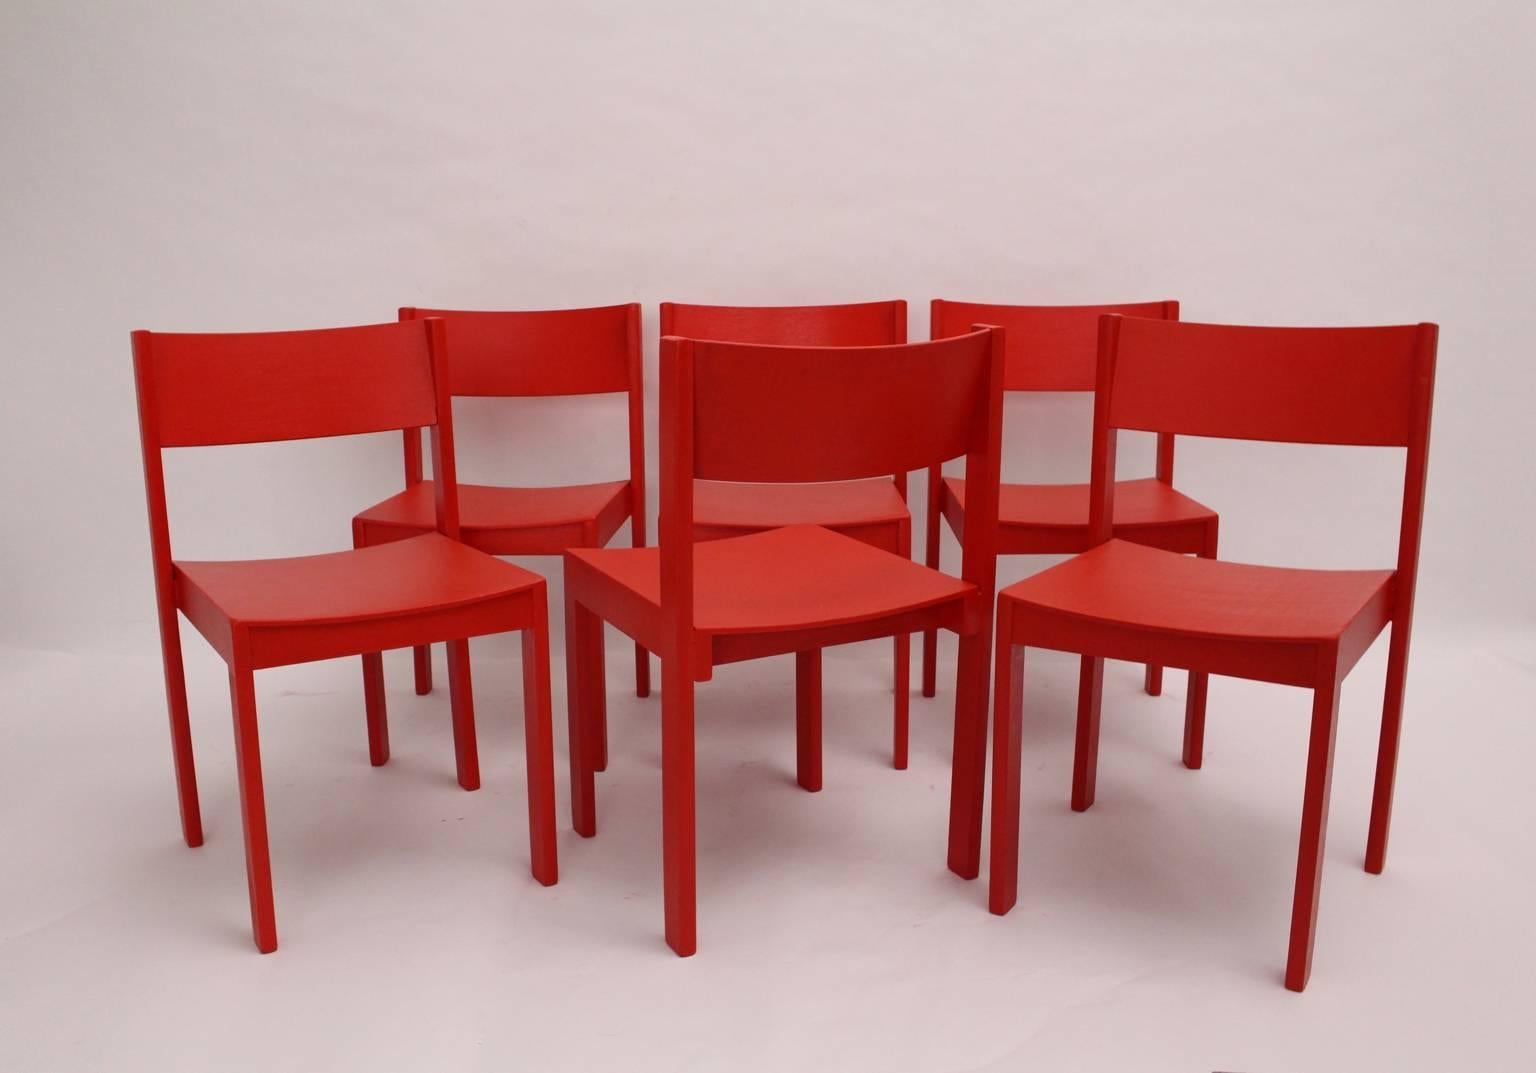 20th Century Mid-Century Modern Red Carl Auböck Dining Room Chairs, 1956, Vienna Set of Six